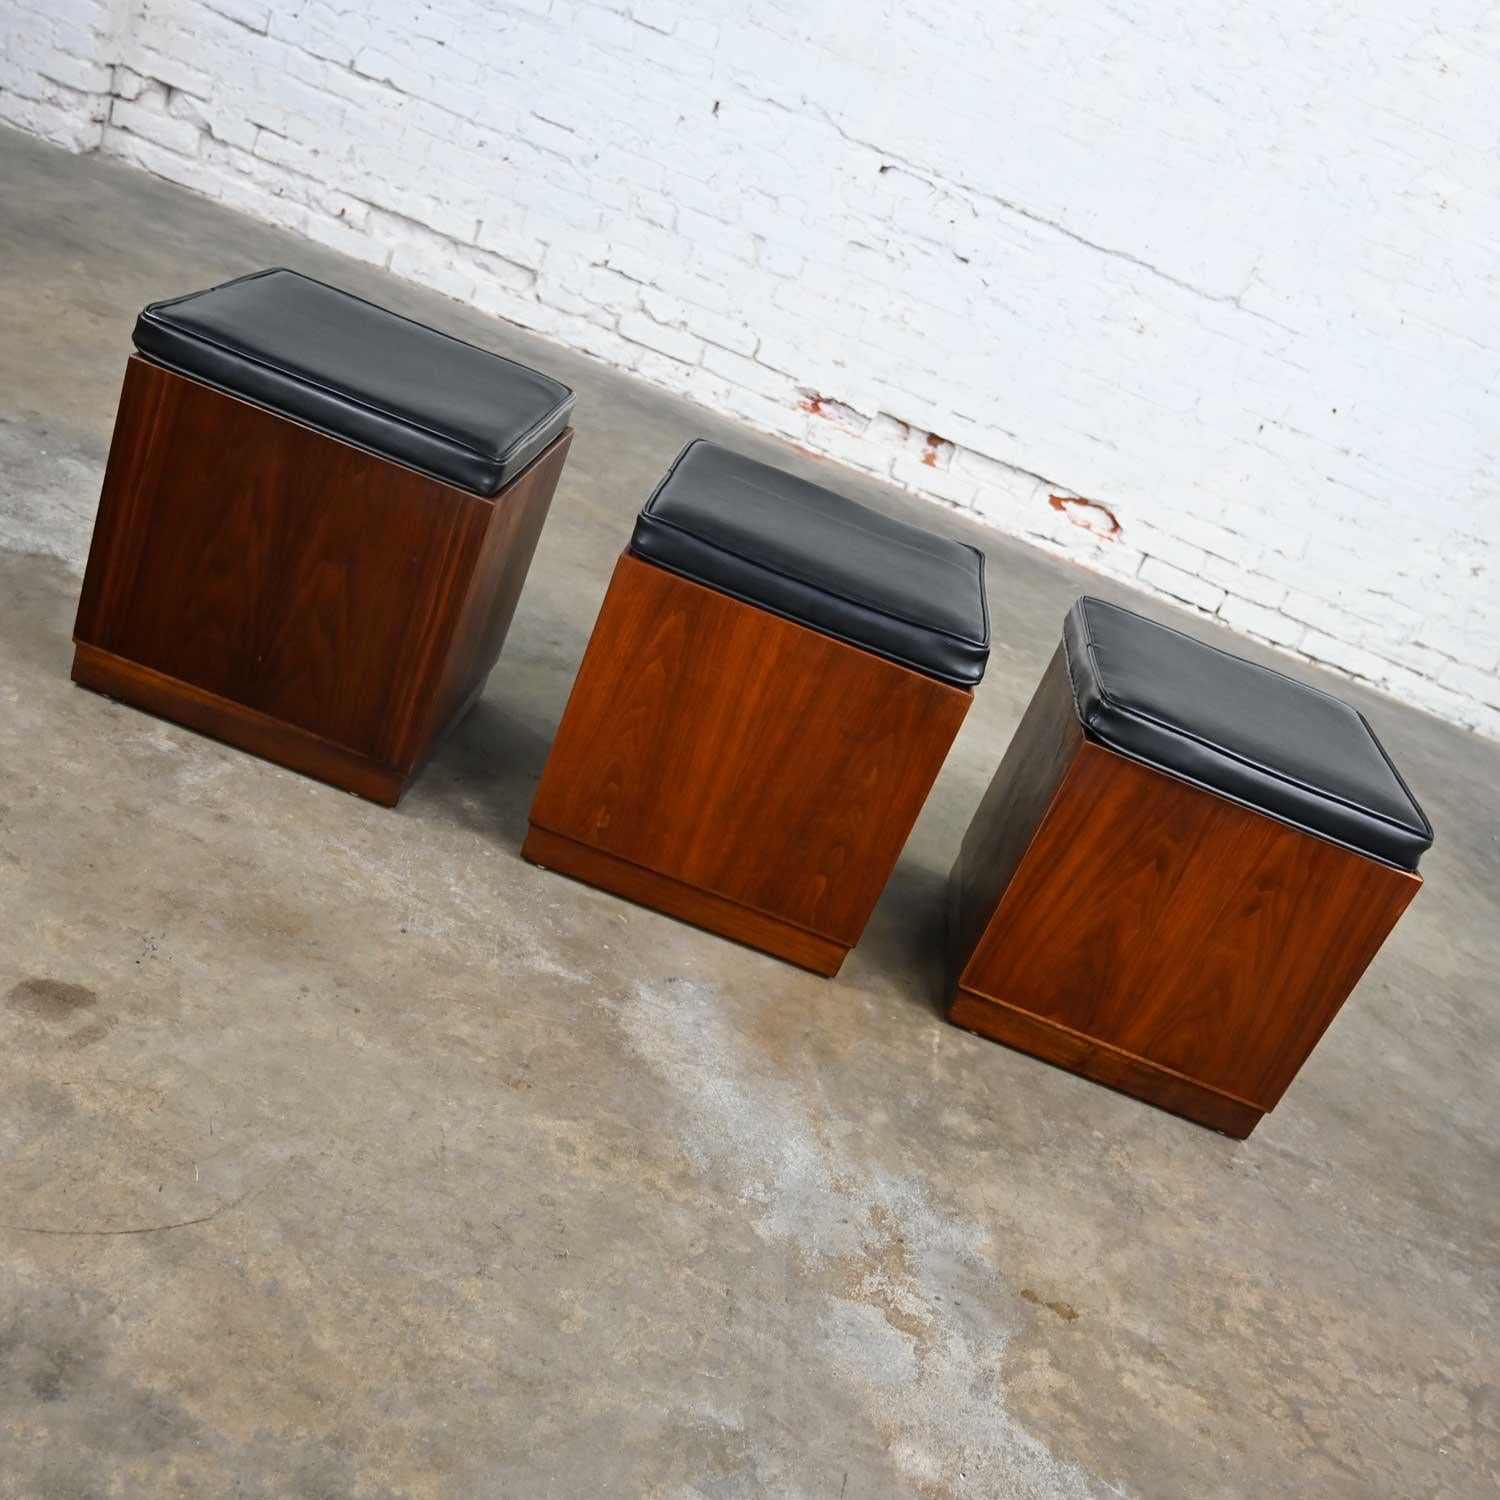 MCM 3 Walnut Cube Stools Black Upholstered Tops Jack Cartwright for Founders In Good Condition For Sale In Topeka, KS